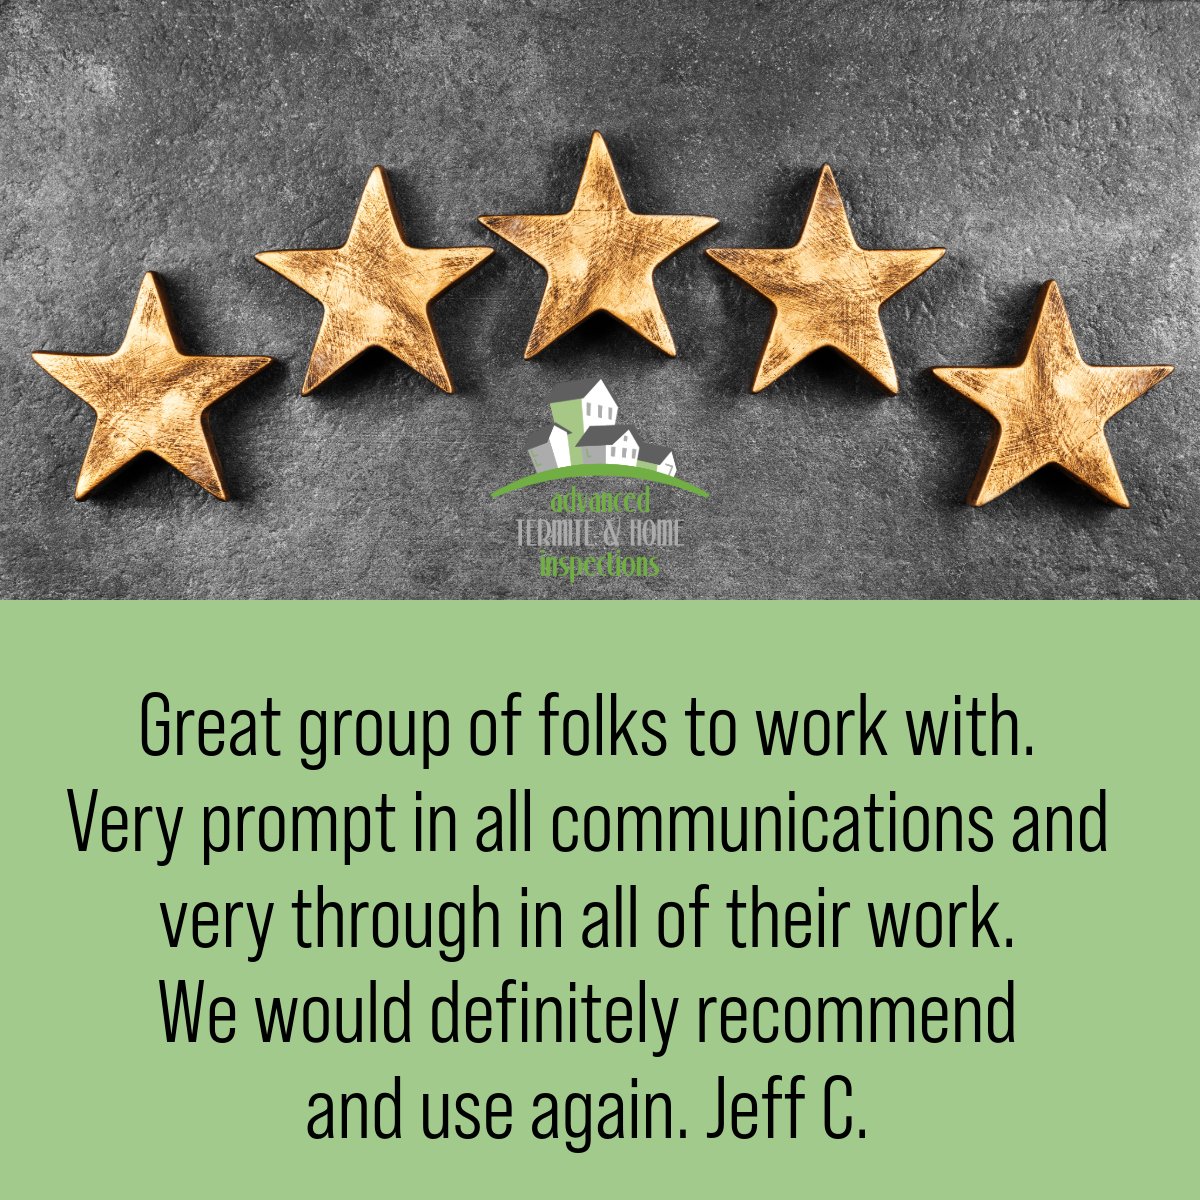 At Advanced, it's our mission is to perform thorough, detailed inspections, and we're delighted to know that we've met expectations. Satisfaction is our top priority, and a 5-star rating means the world to us! #advancedtermtiehomeinspections #homeinspector #homeinspection